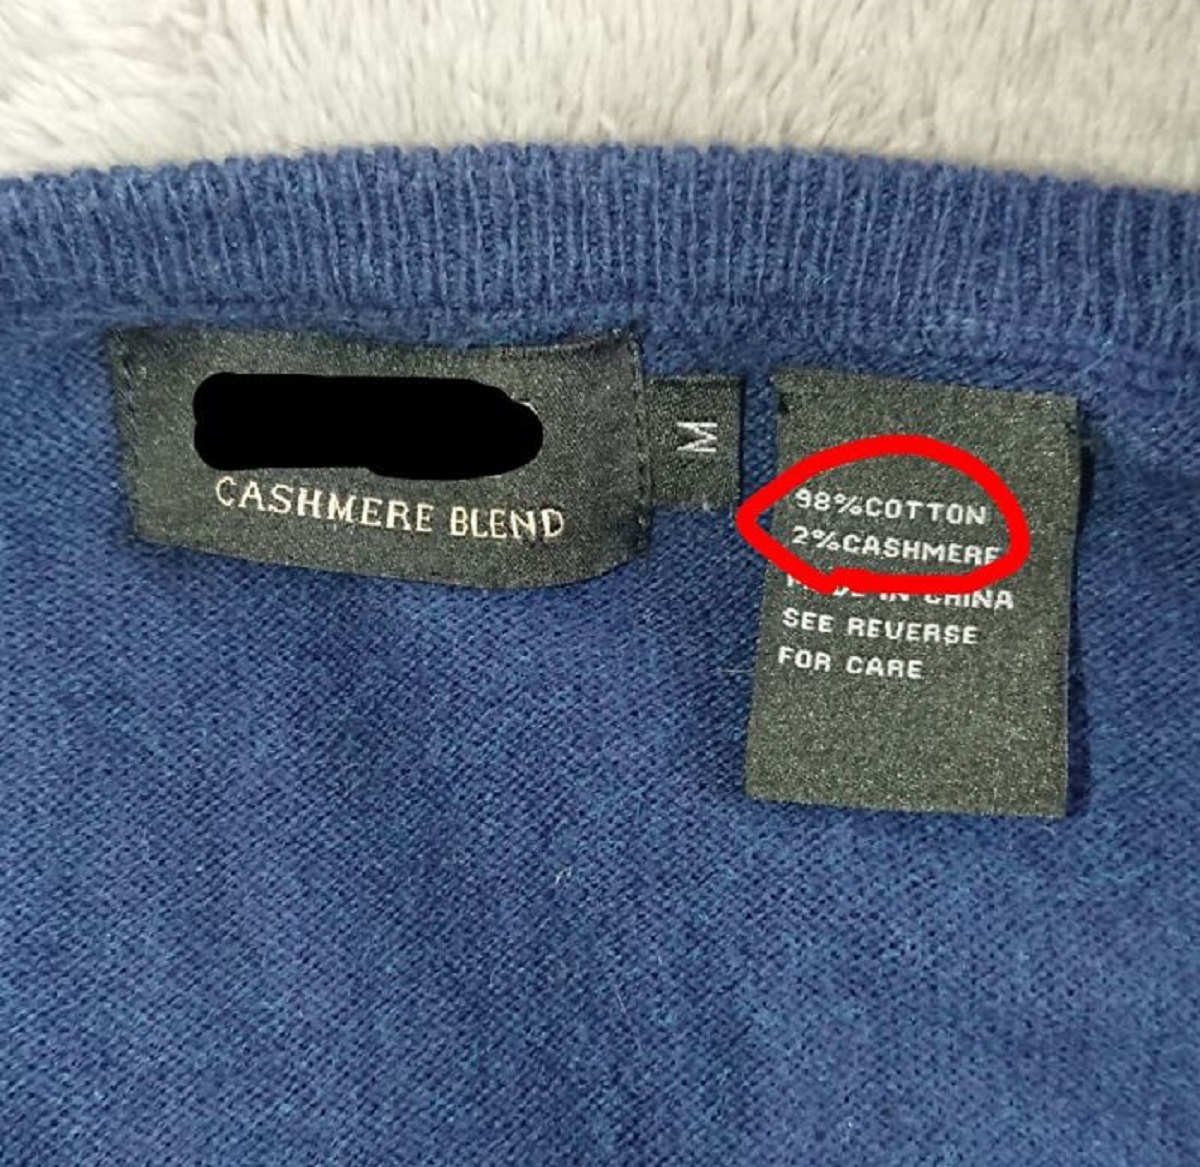 This "Cashmere Blend" Sweater